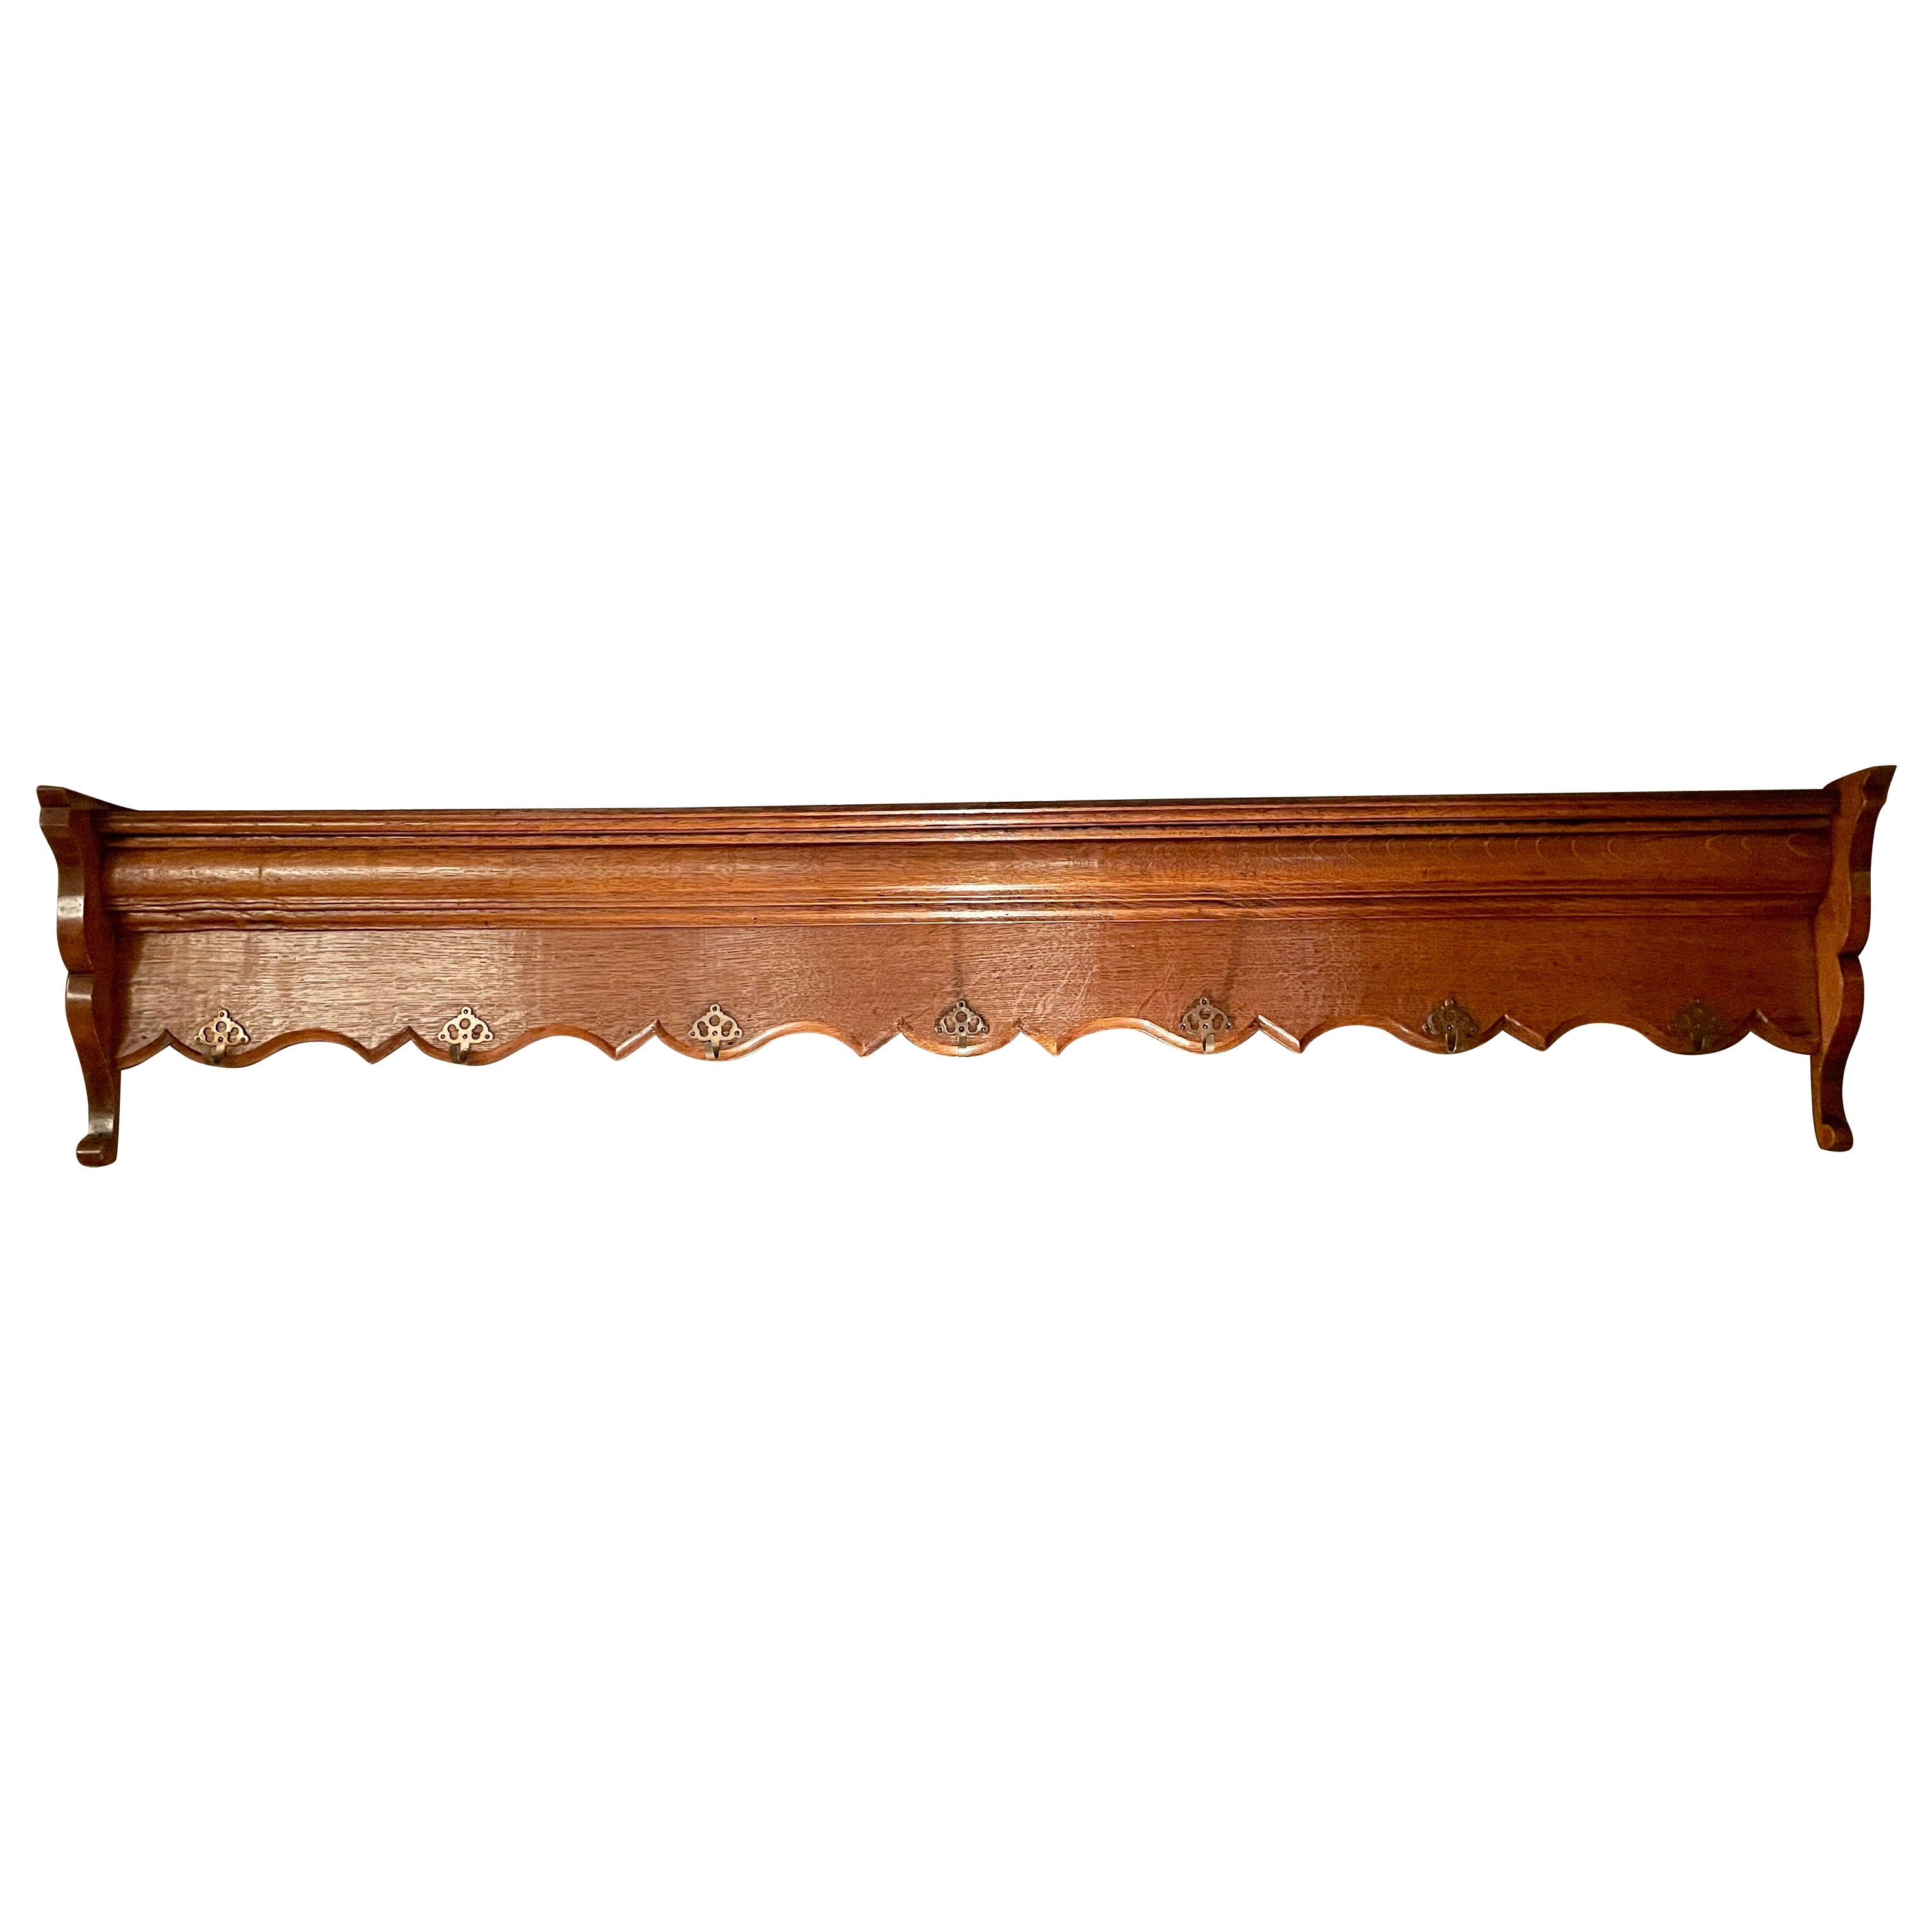 Antique French Provincial Carved Fruitwood Hanging Rack, Circa 1890-1900.